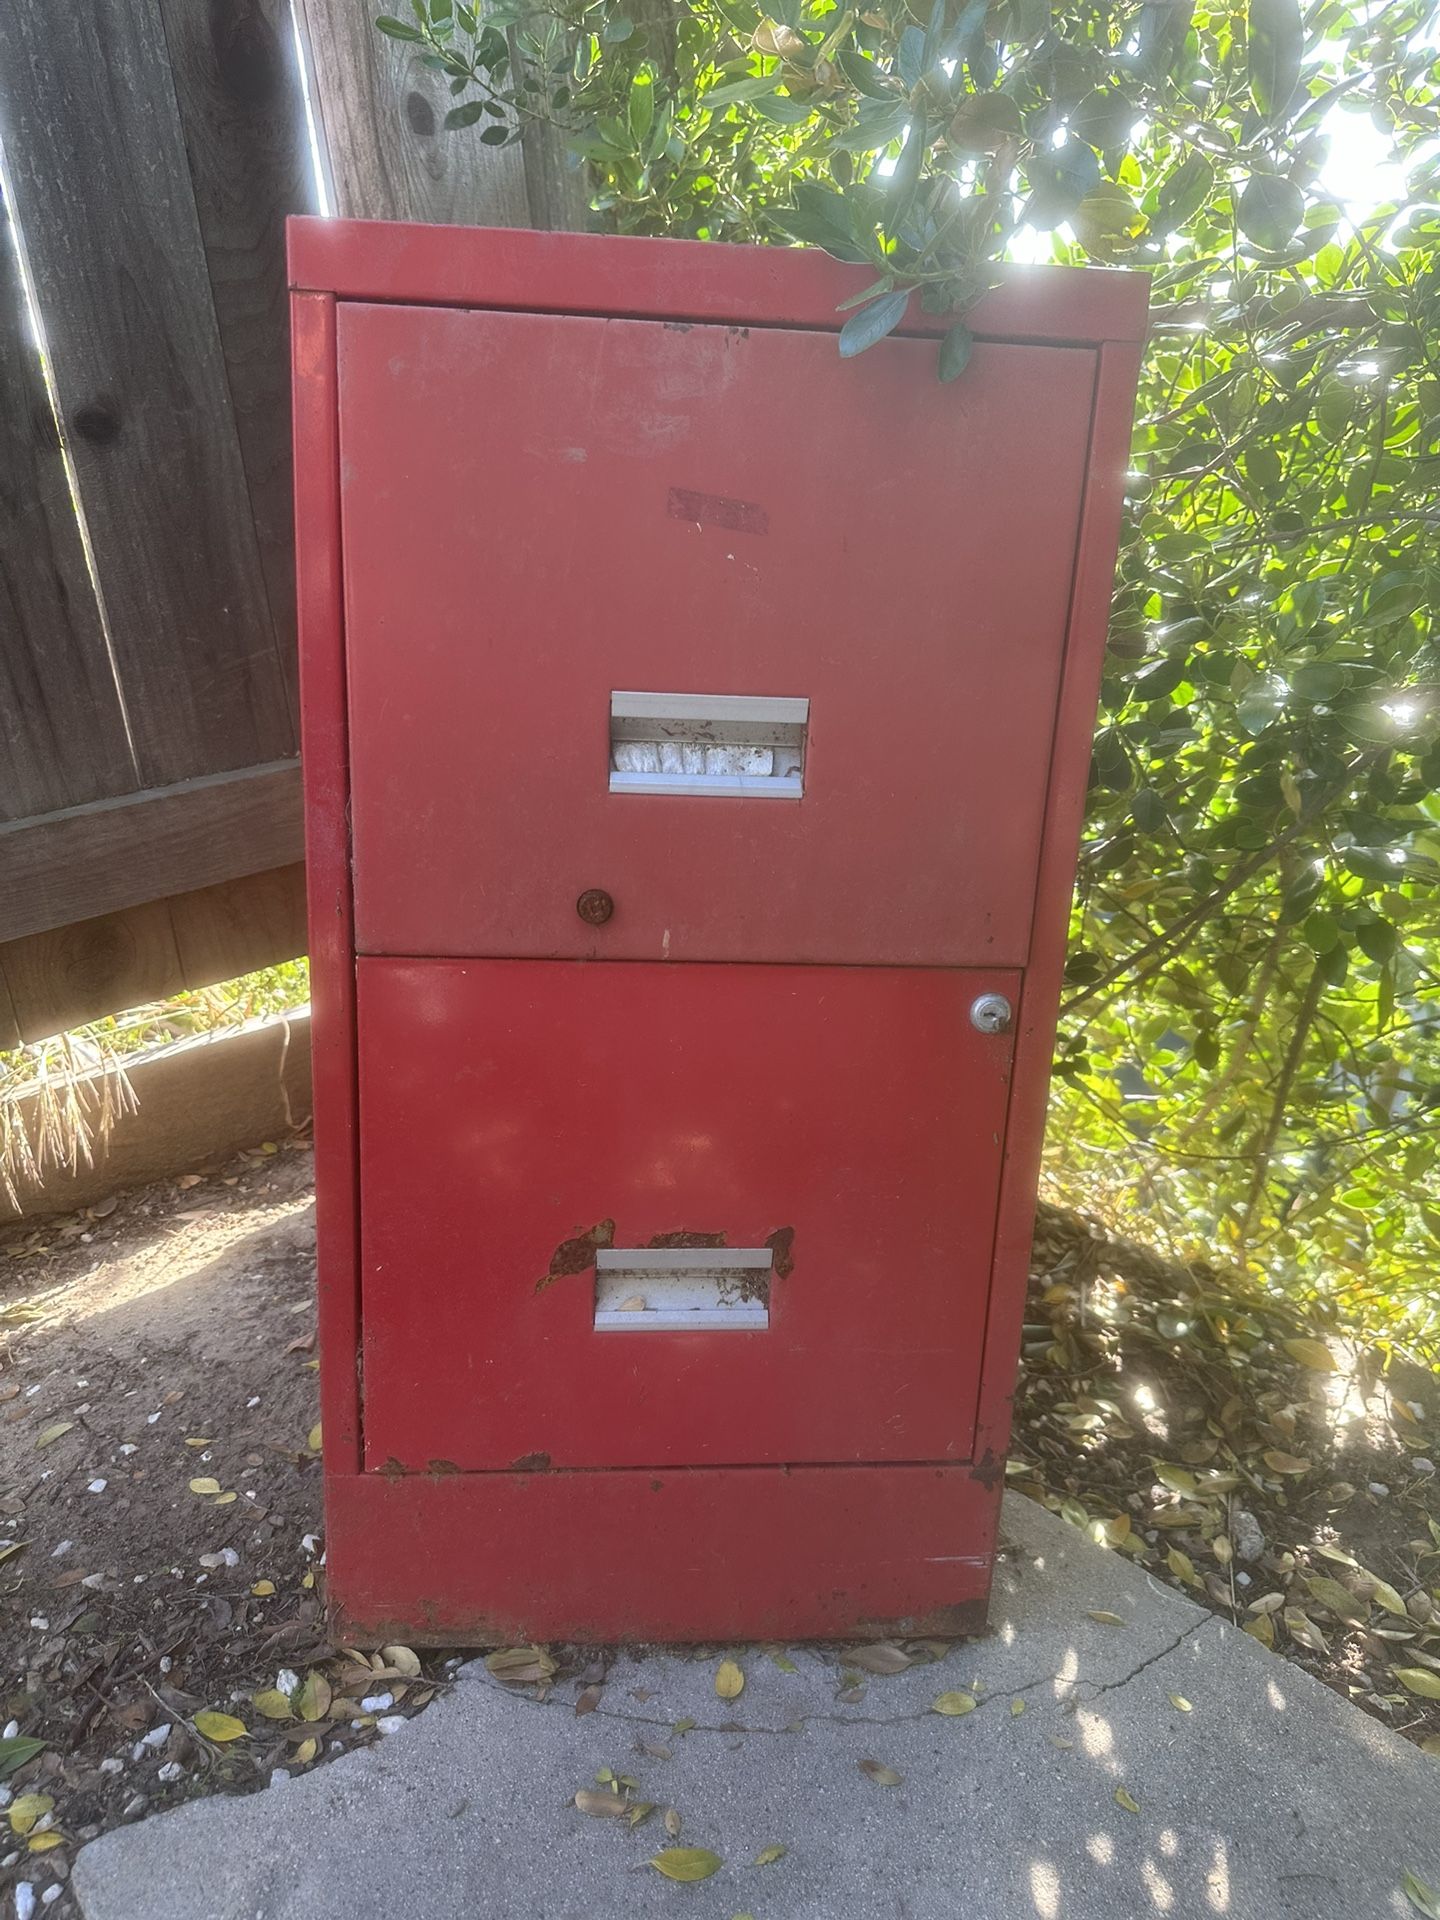 FILING CABINET FOR OUTDOOR PLANTING/OTHER